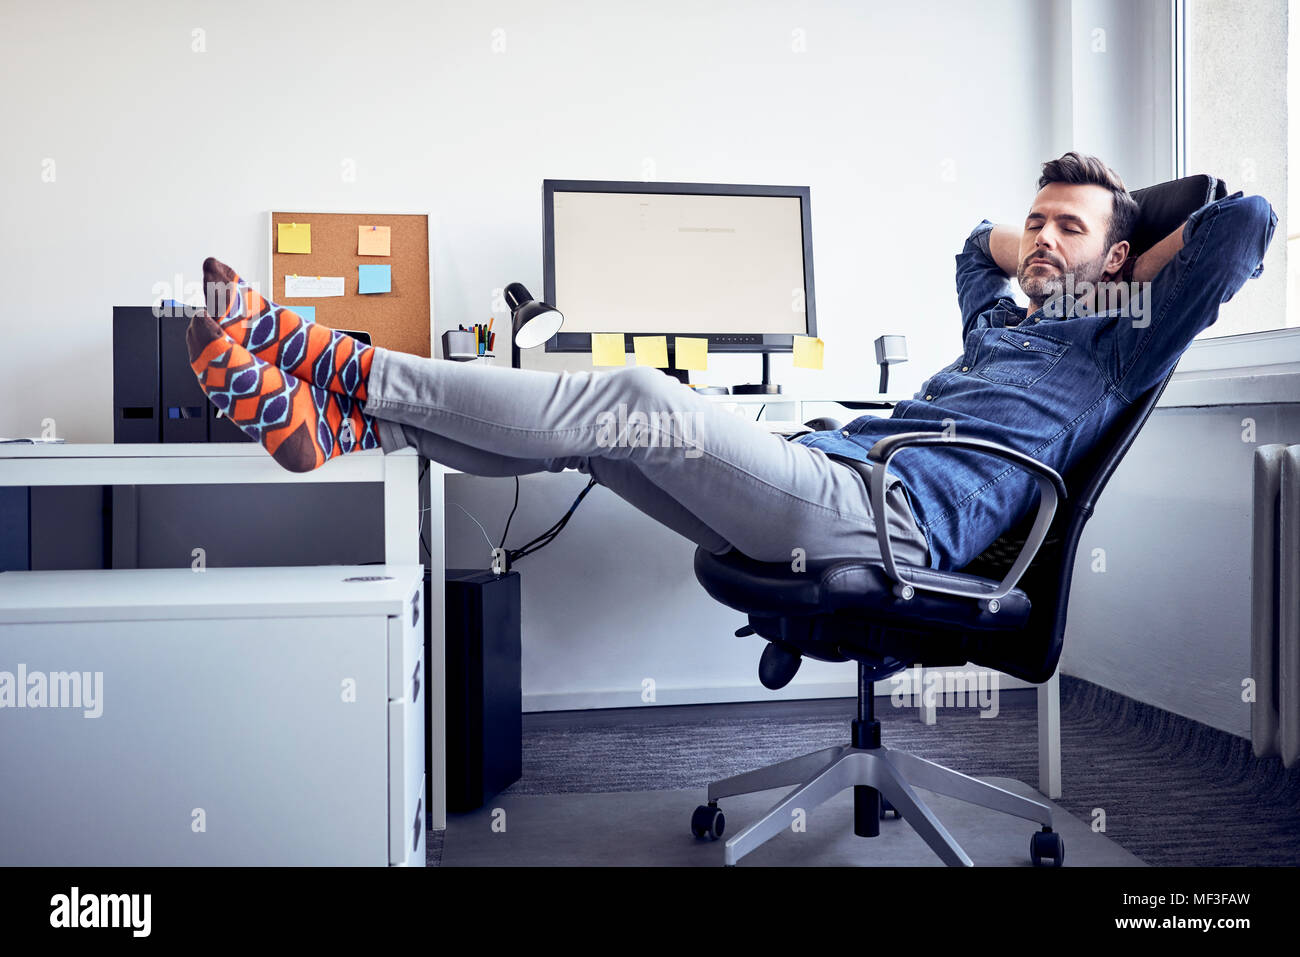 Man sitting at desk in office having a power nap Stock Photo